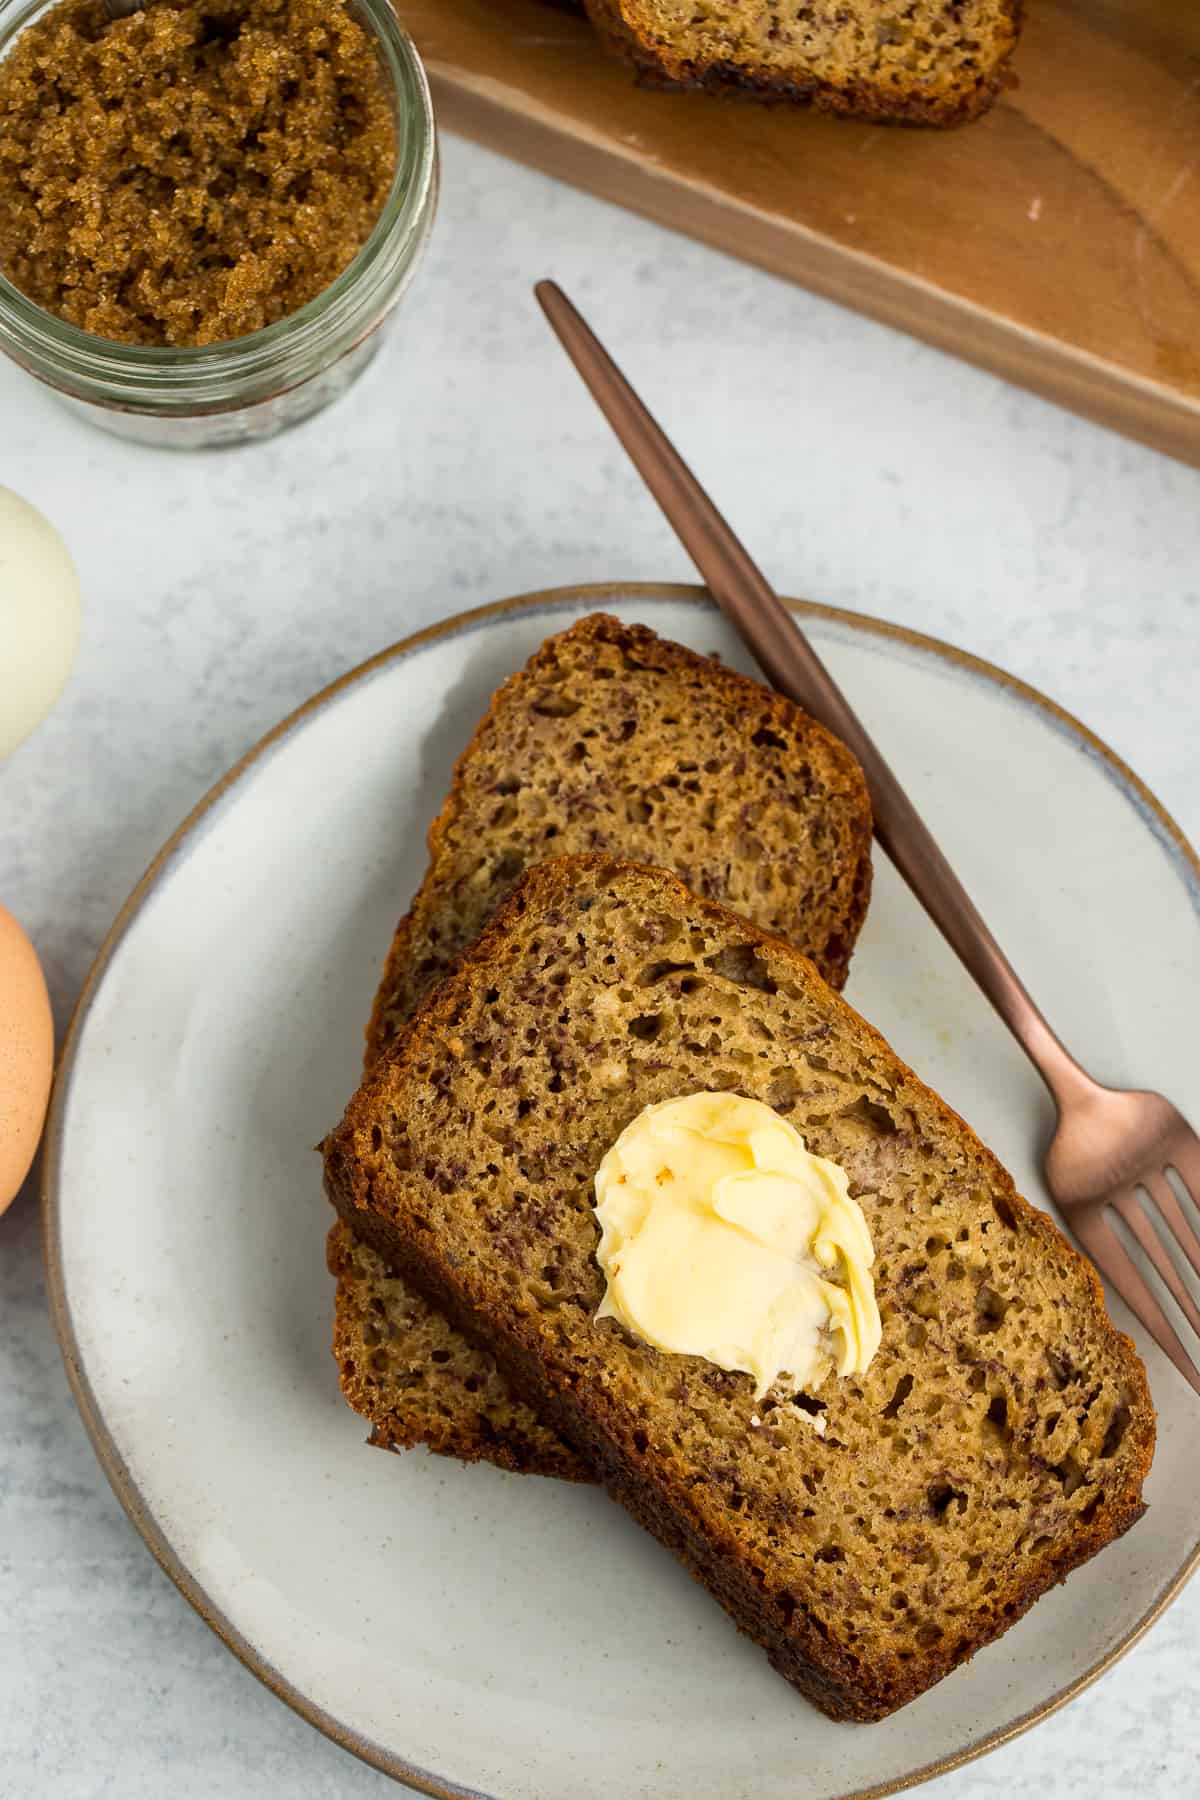 a buttered piece of banana bread on a plate with a fork.